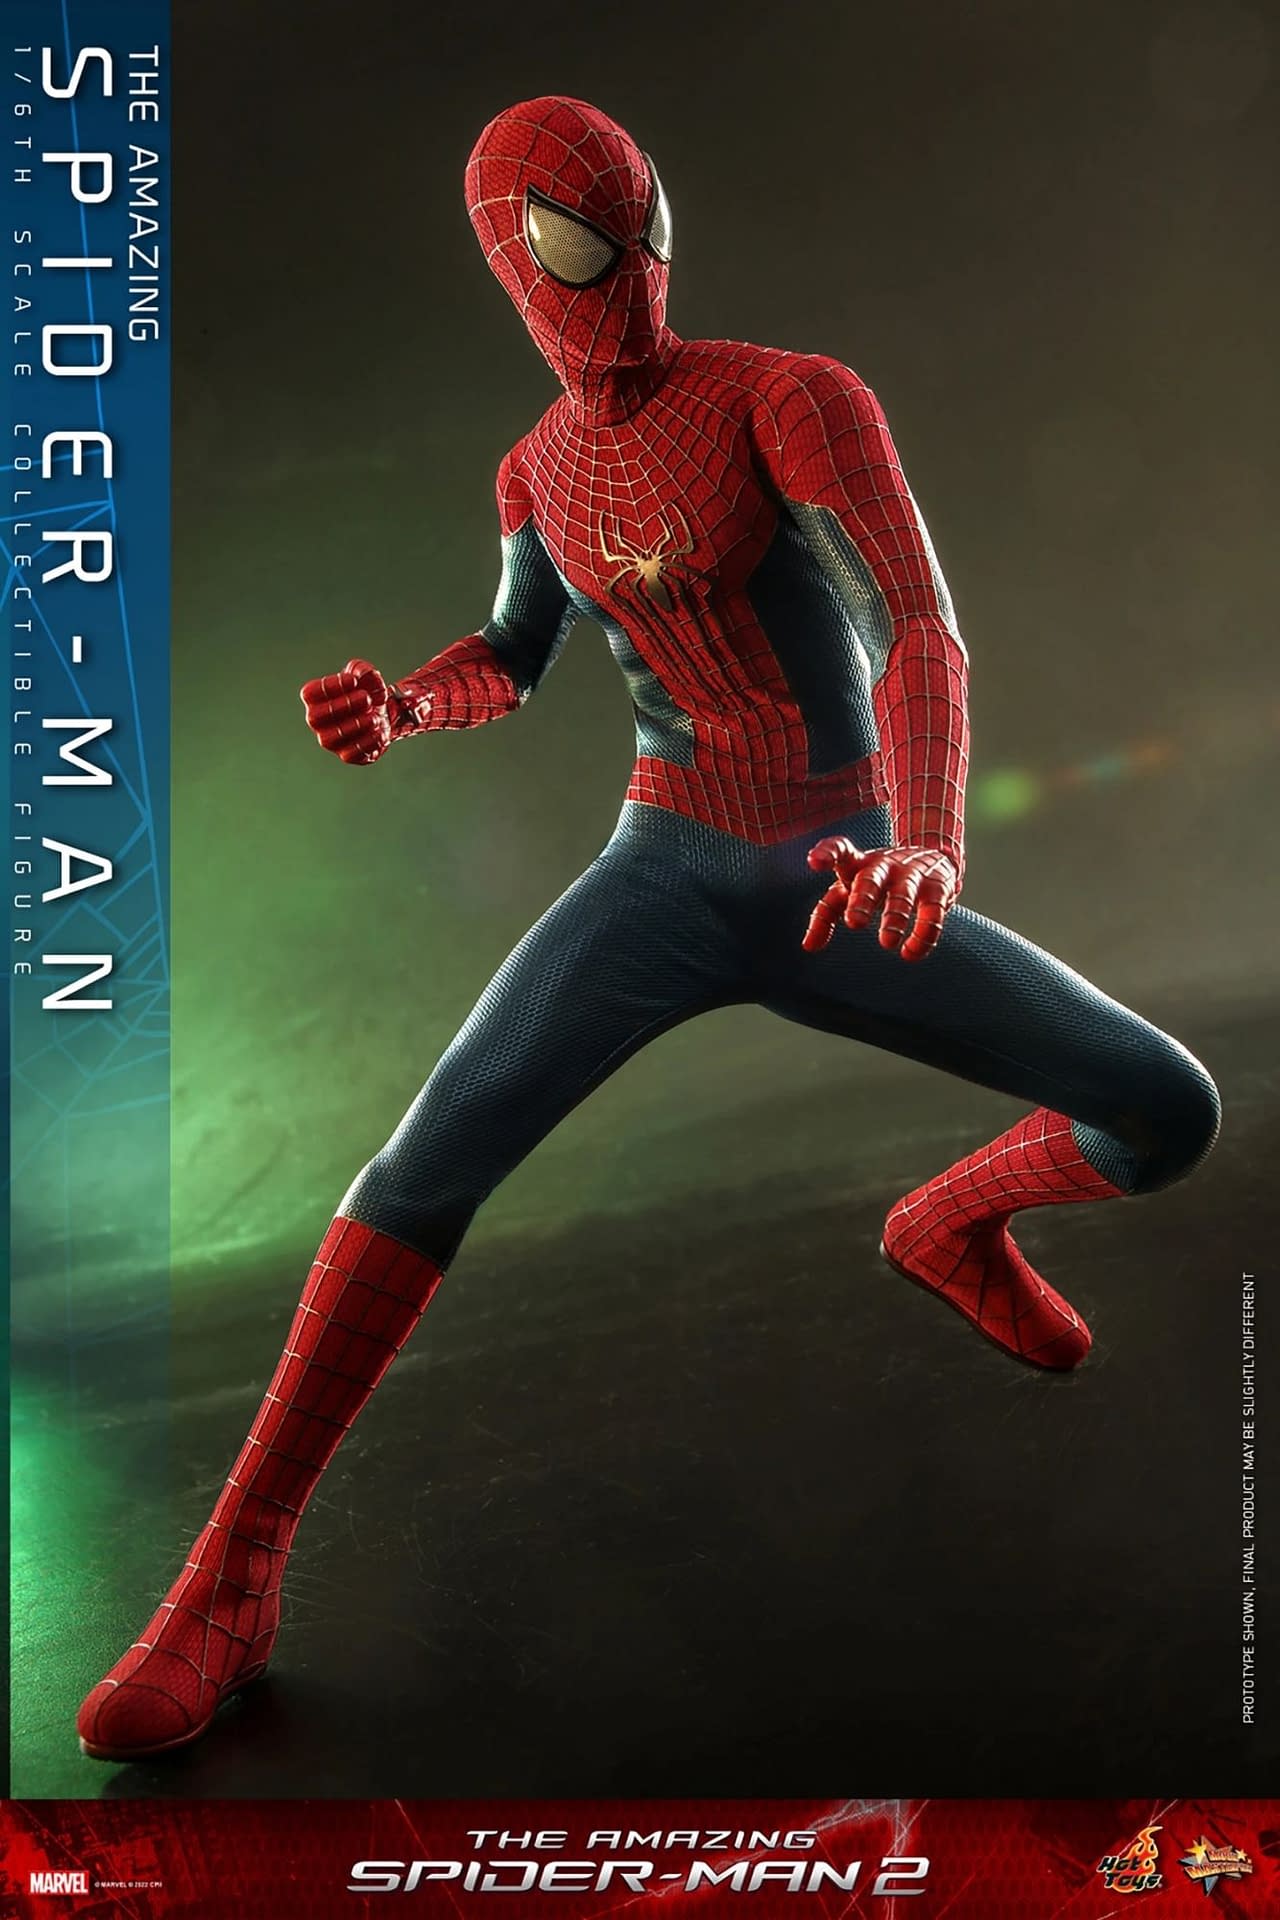 Pre-orders Finally Arrive for Hot Toys The Amazing Spider-Man 2 Figure 